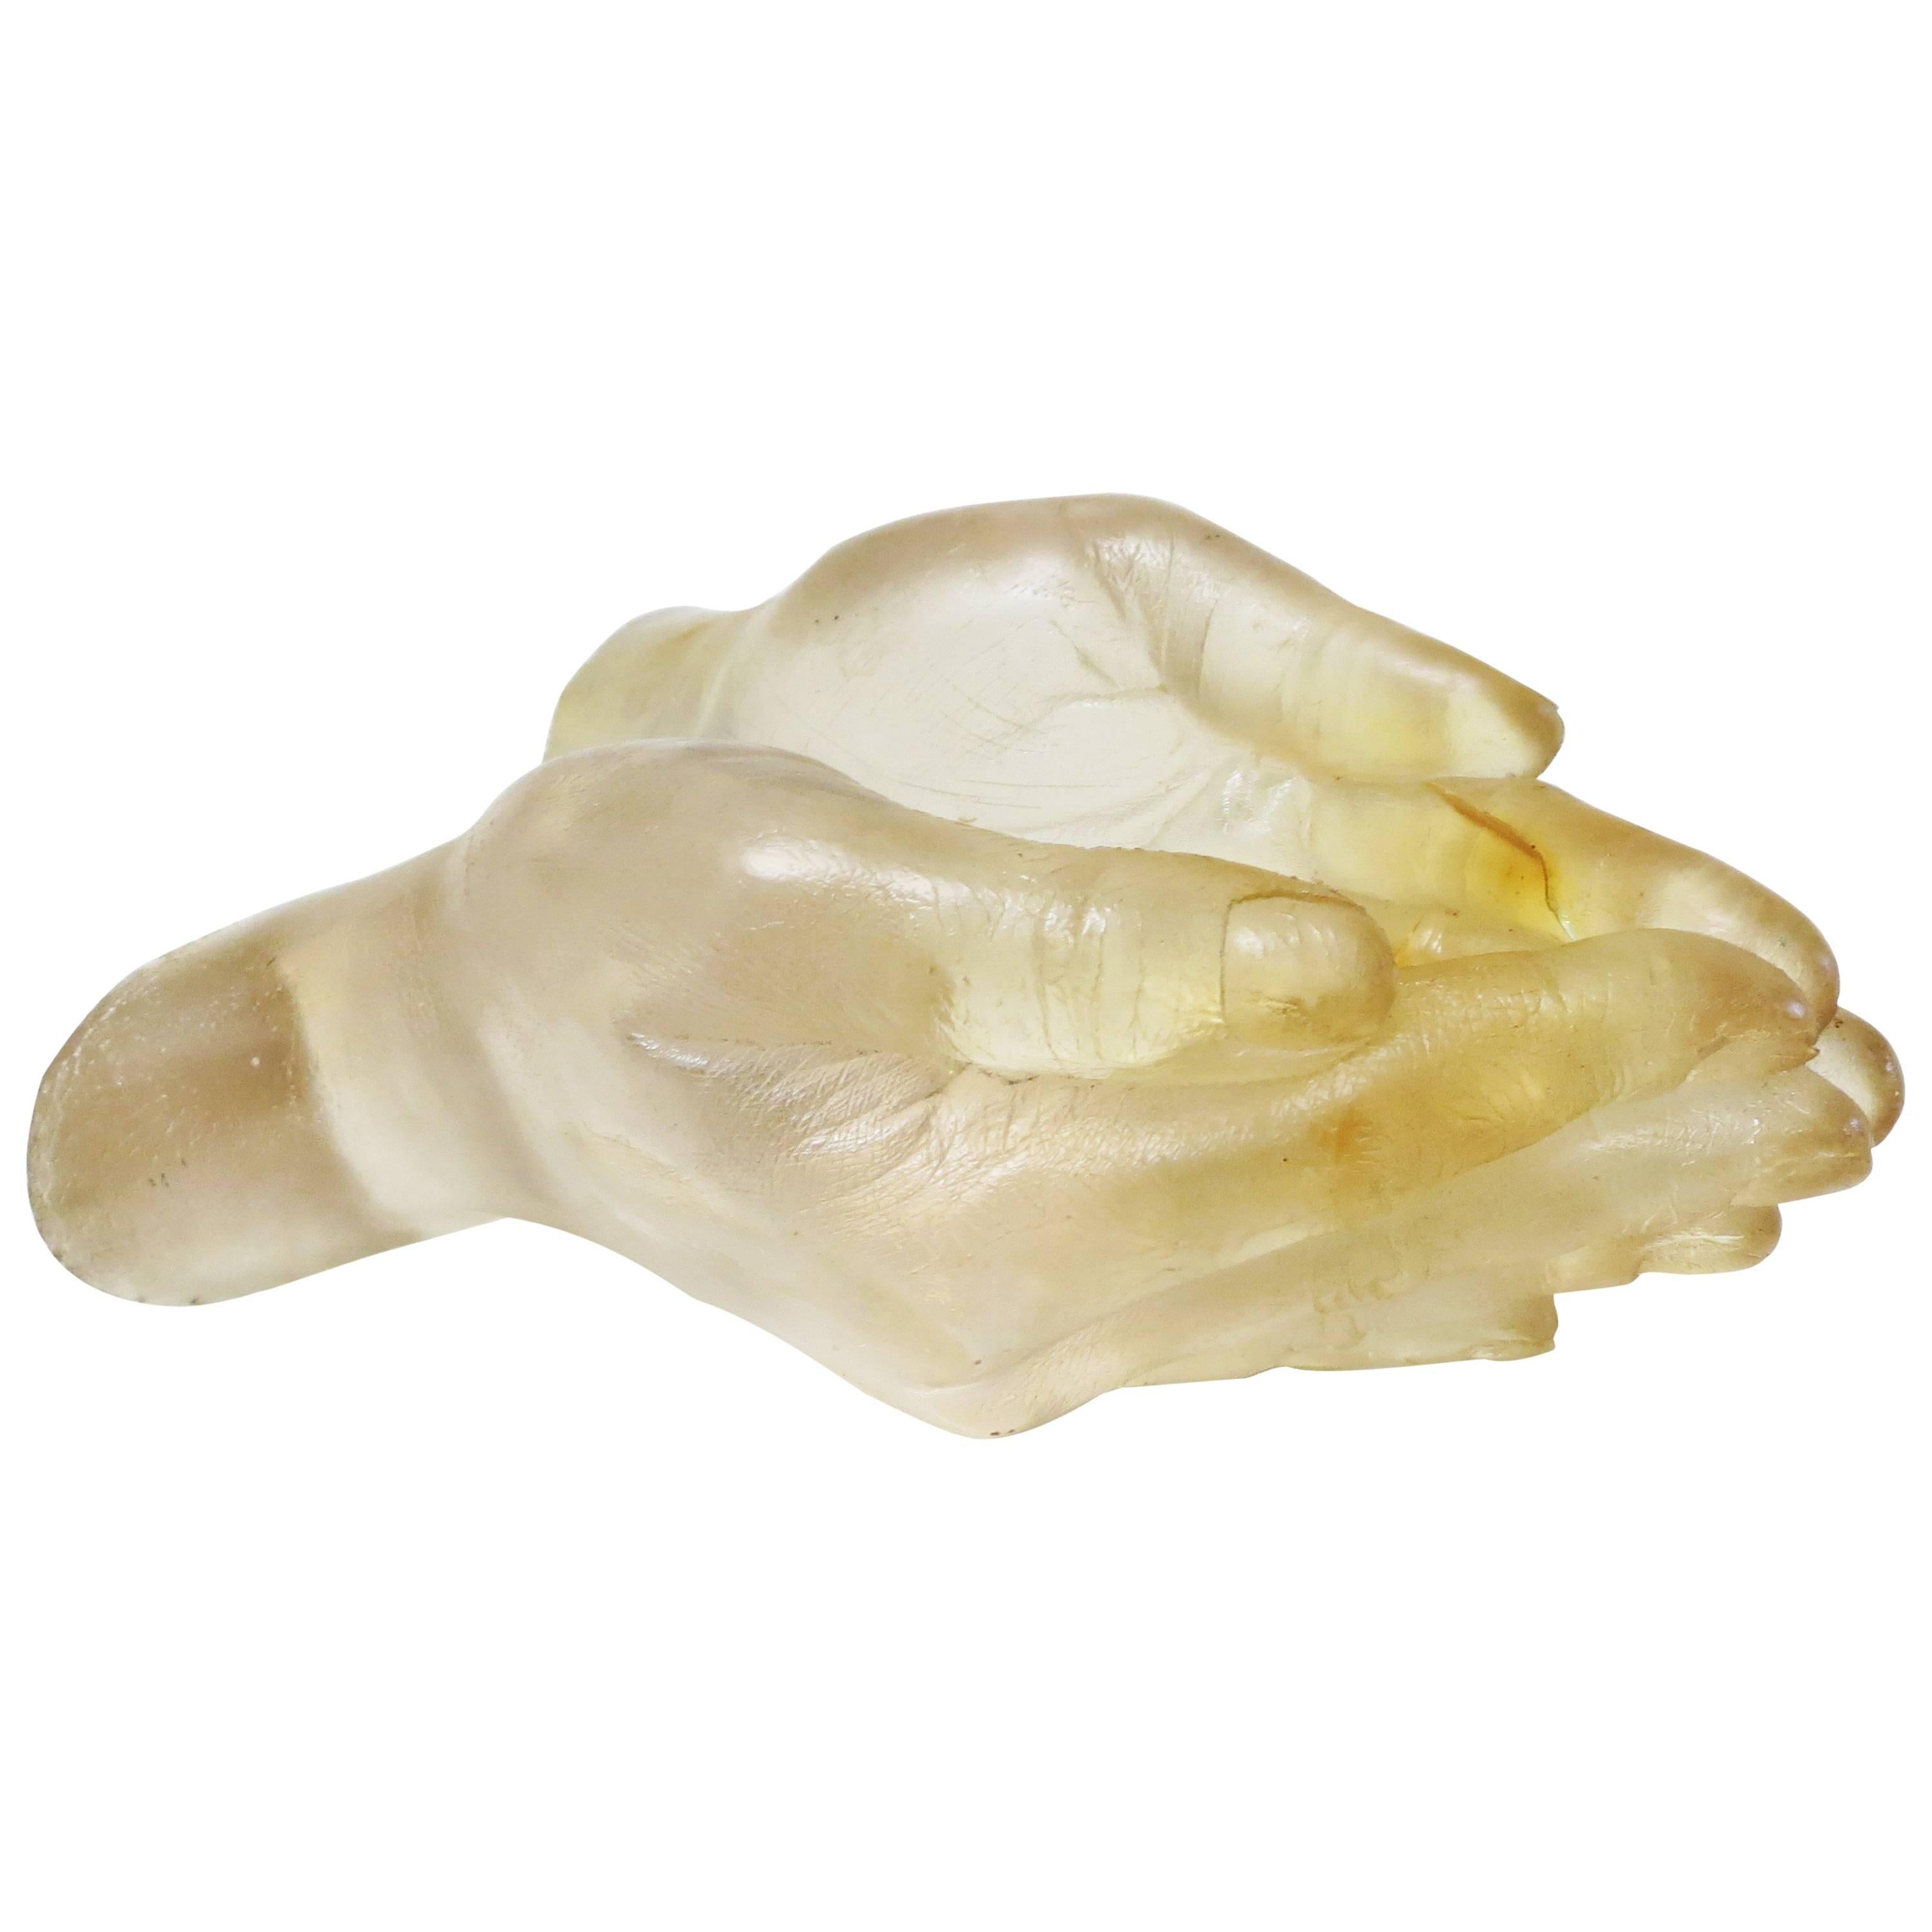 Sculpture Hands in Yellow Resin Attributed to Pierre Giraudon